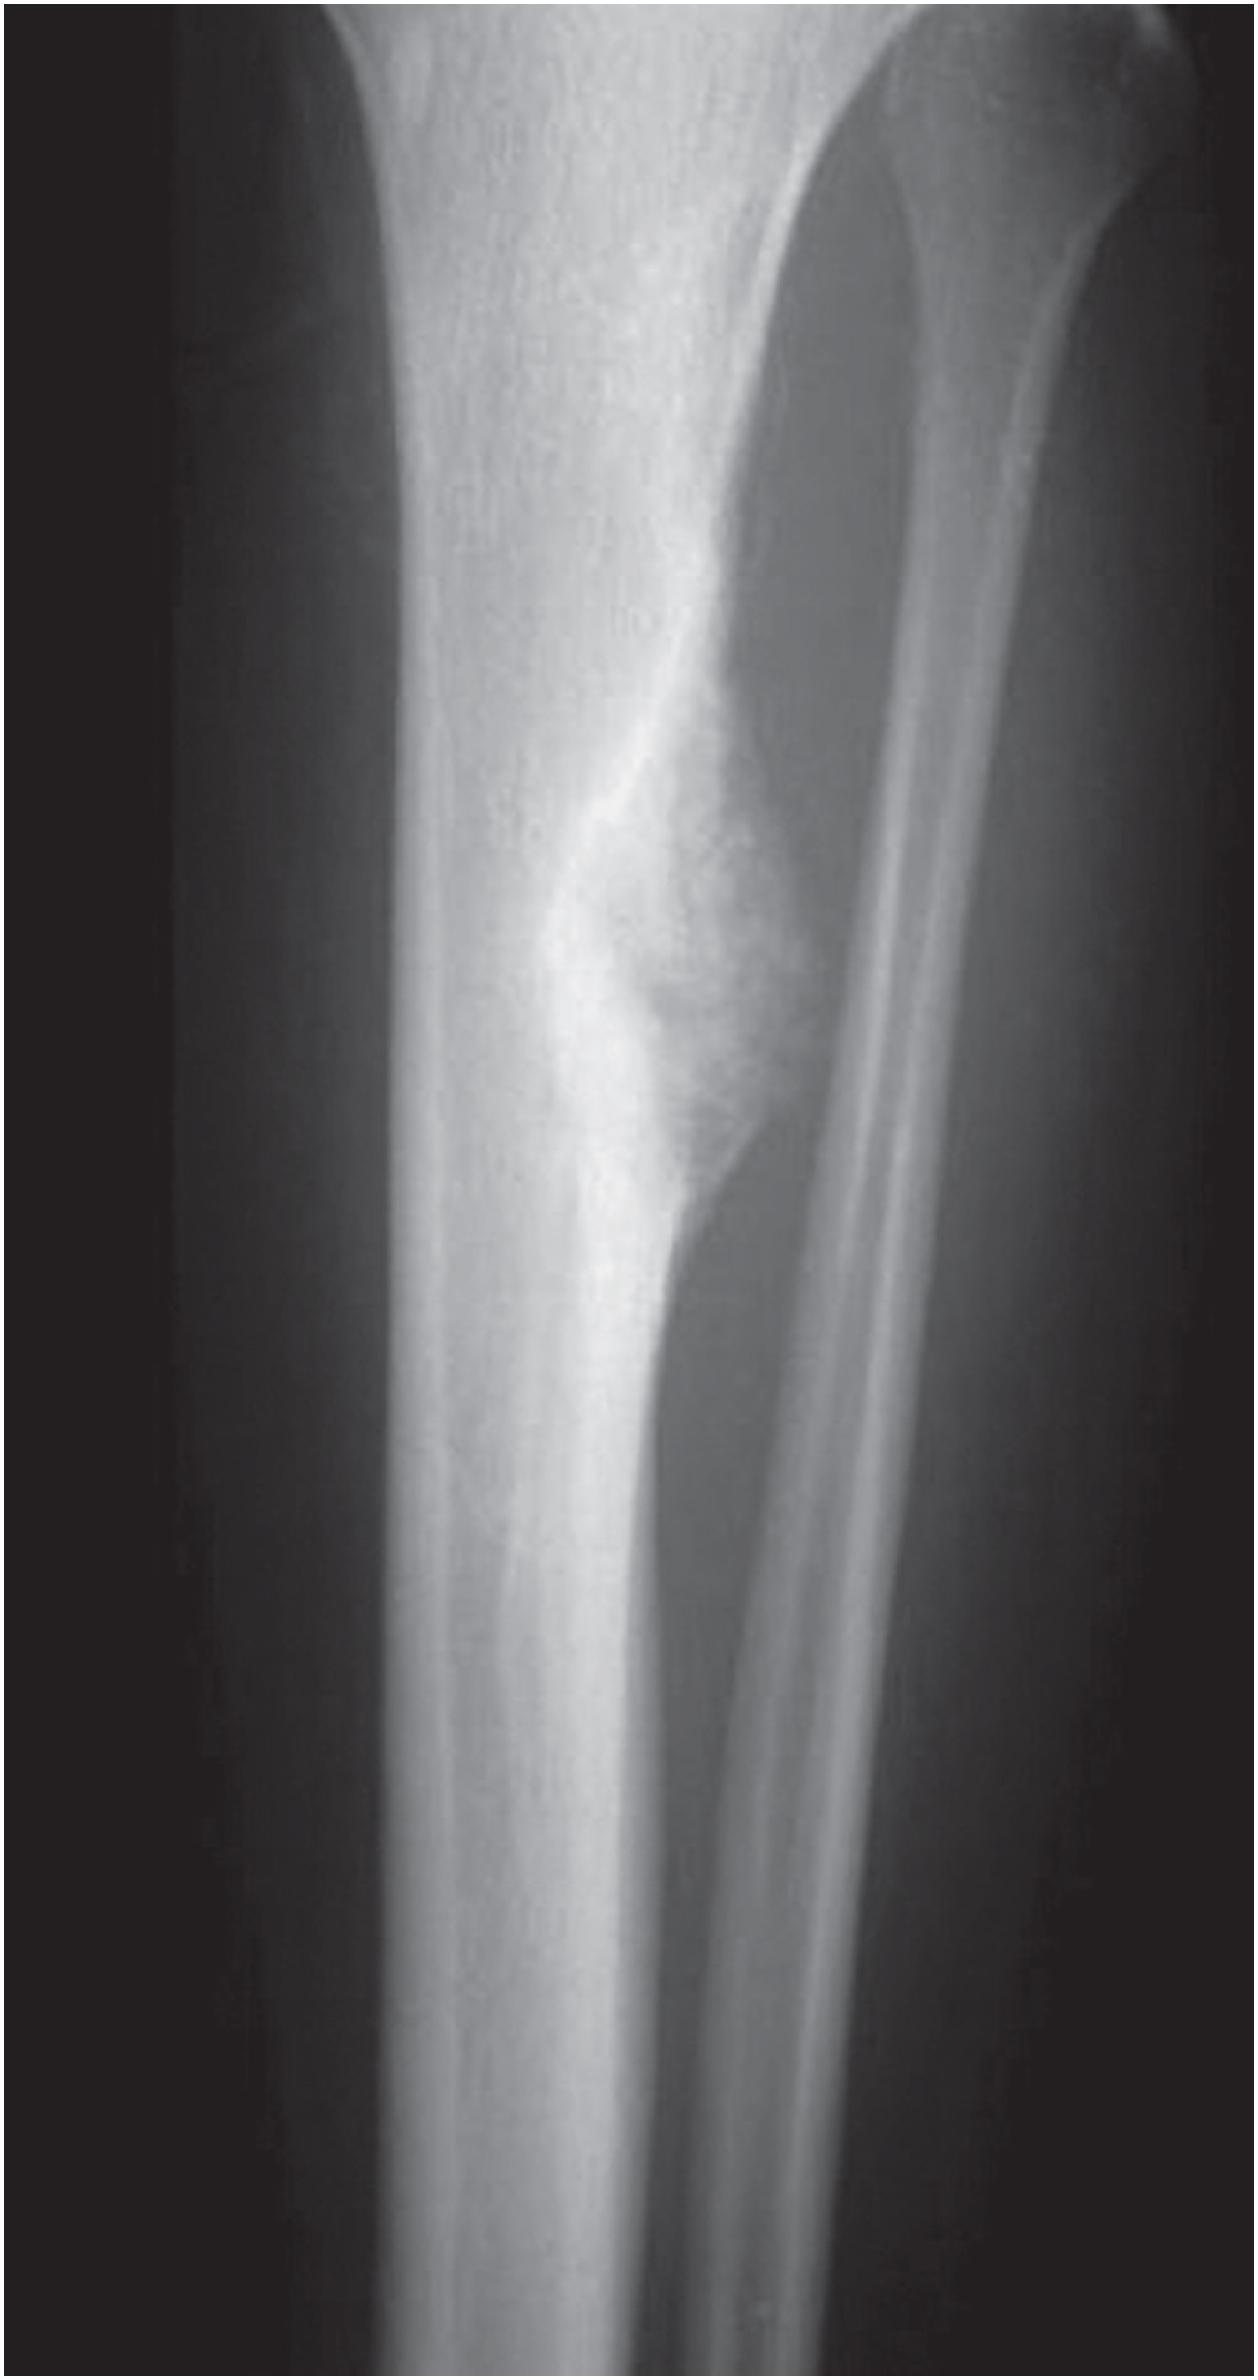 Fig. 22.1, Plain radiograph of OFD showing a lytic lesion within the tibial cortex with a sclerotic margin.